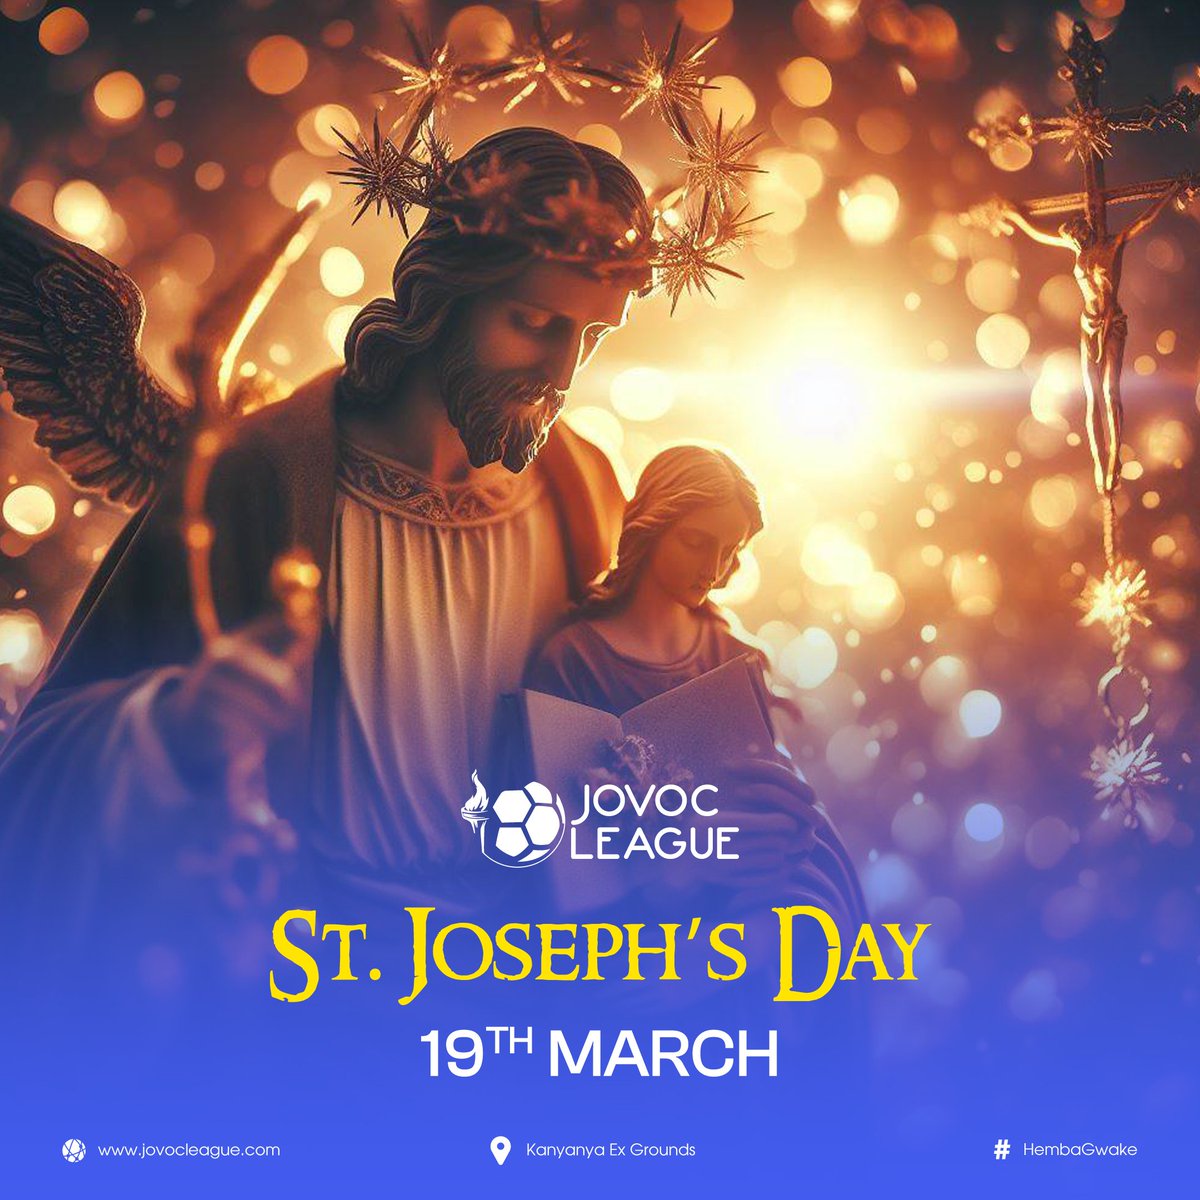 Happy St. Joseph’s Day! 

Today, we honor our school's patron saint for his unwavering dedication to God and service to others.

Let's embrace his teachings and spread love as missionaries of God’s love. 🙏❤️ 

#StJosephsDay #HembaGwake #JLSeasonIV #HappeningNow